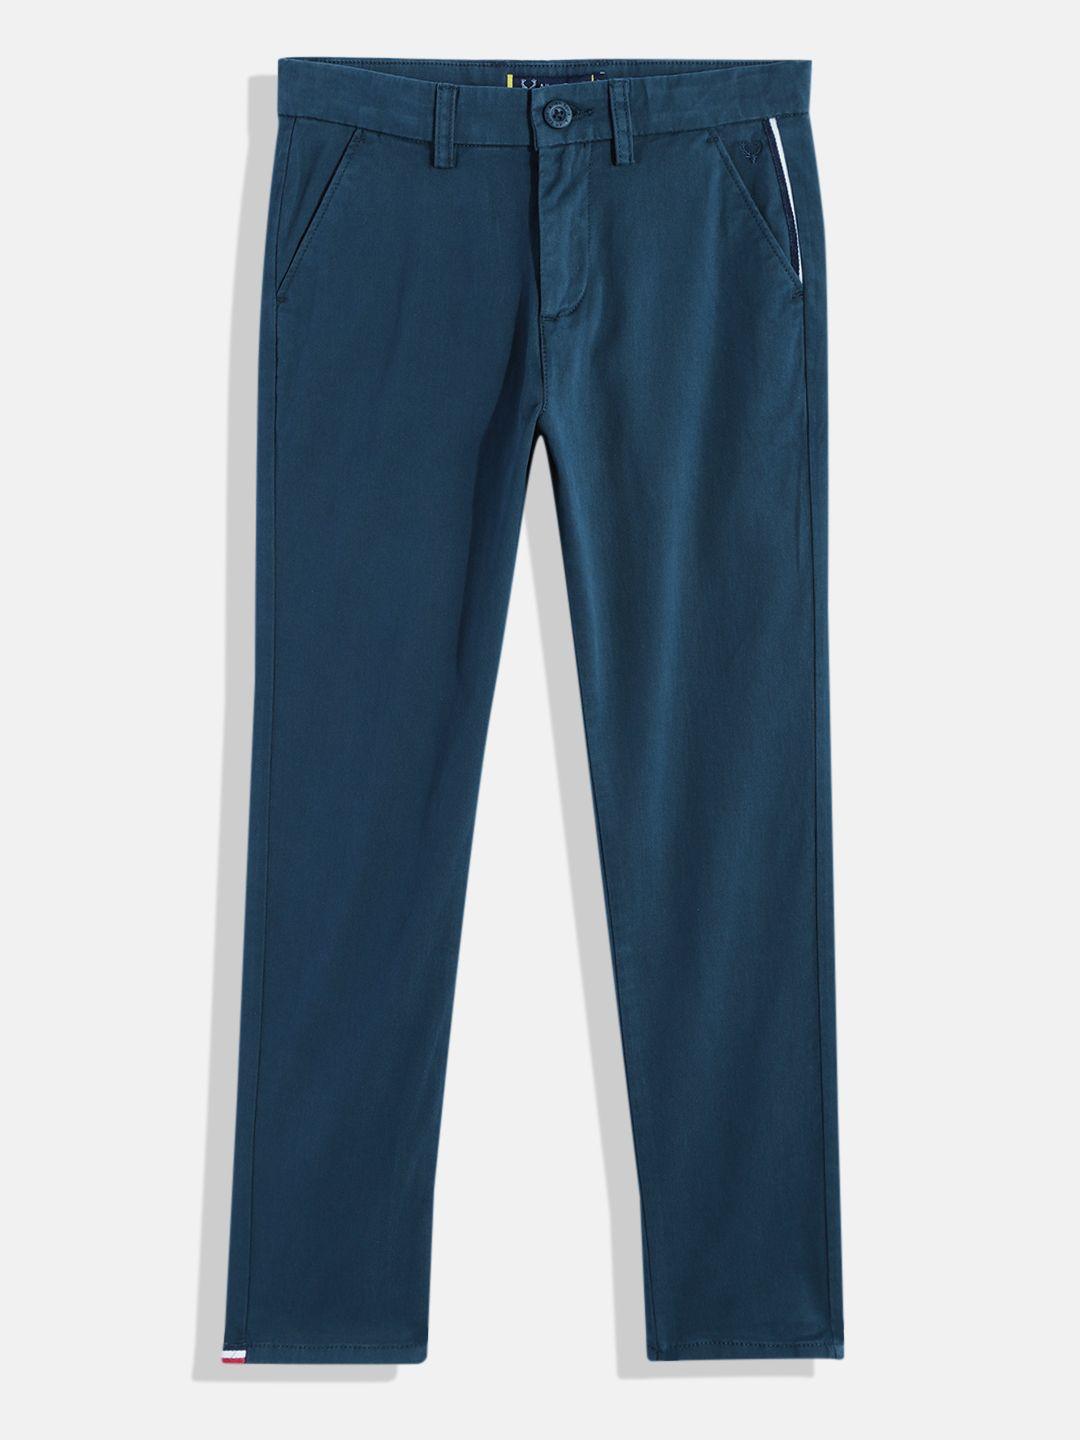 allen solly junior boys teal blue solid classic slim fit trousers